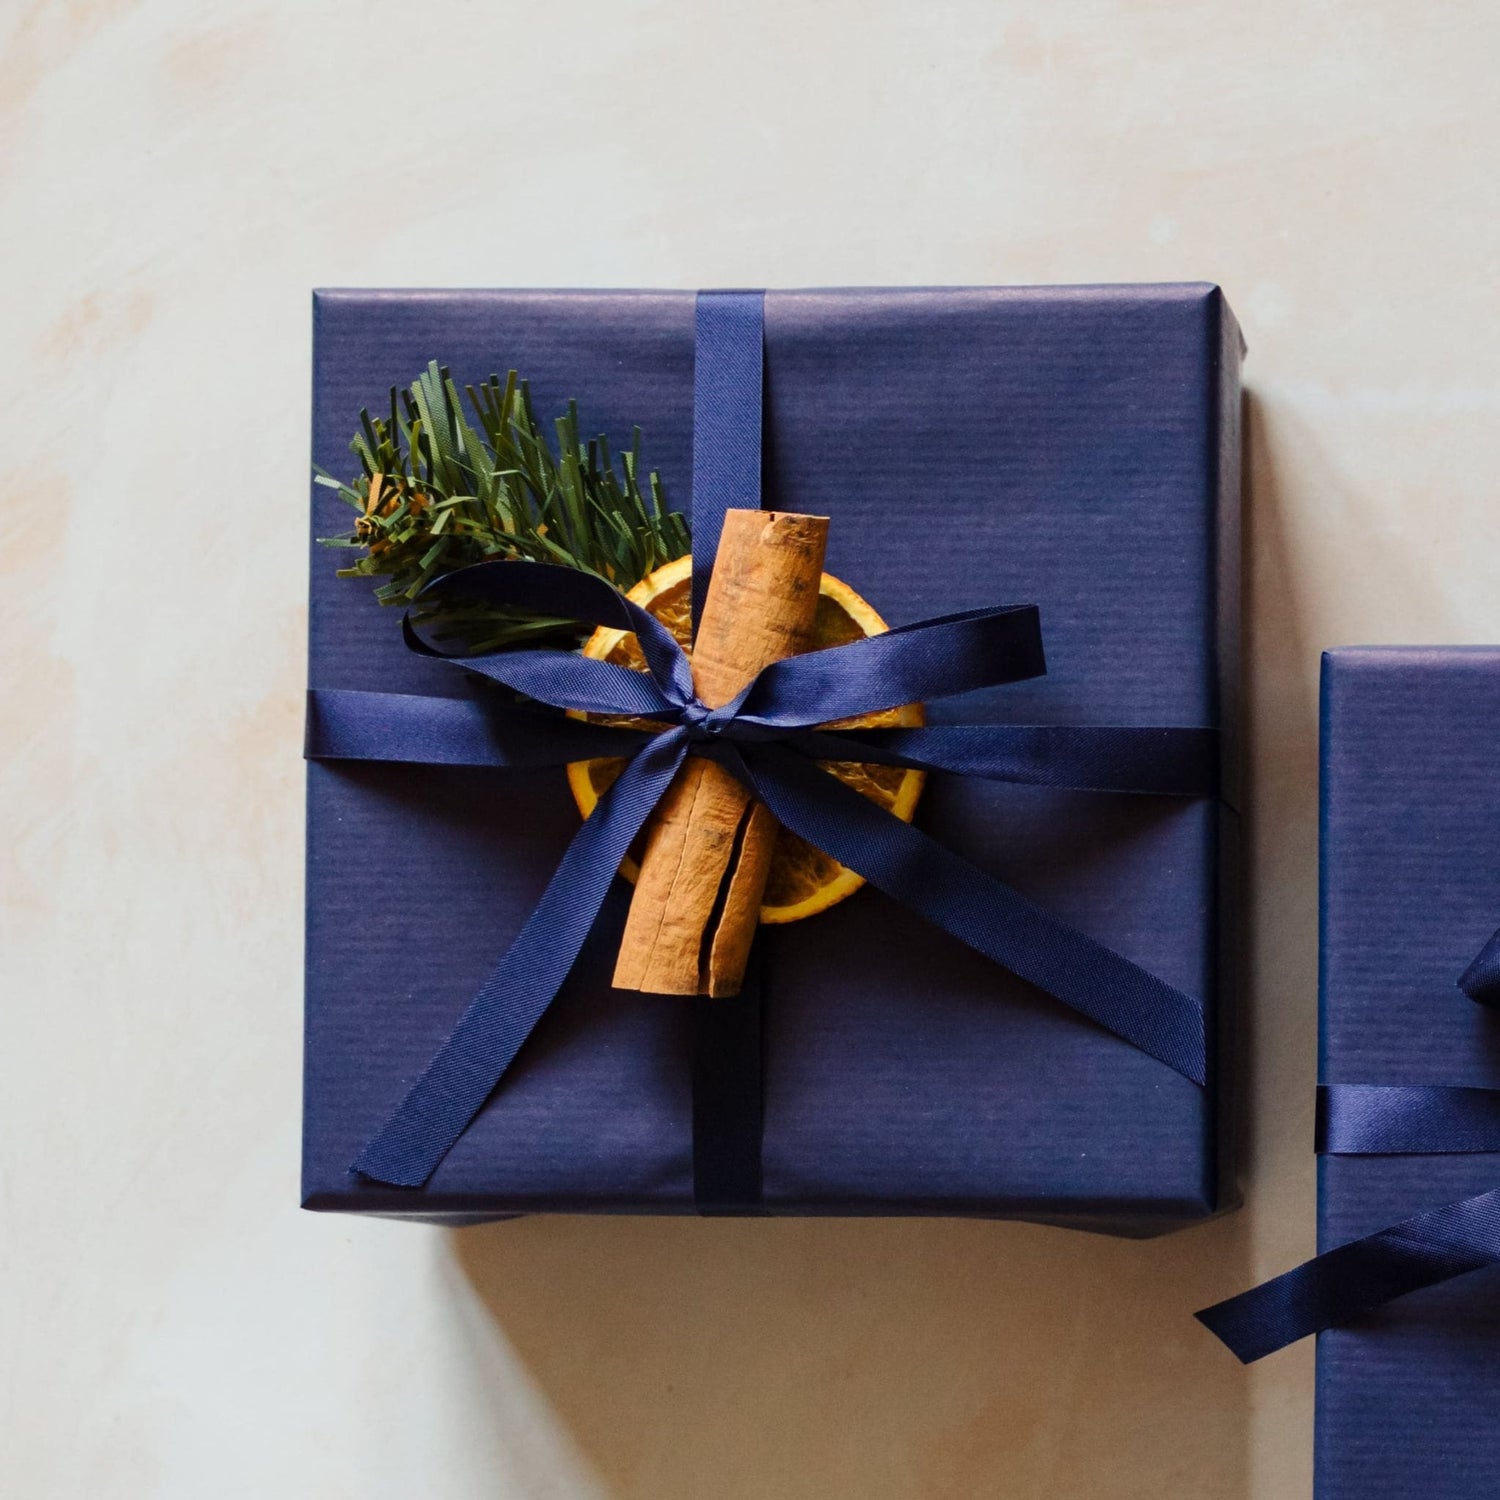 A 400g sweet scented 3 wick soy candle from the Home County Co. is shown with luxury Christmas Gift Wrap. The 3 wick candle is wrapped in luxury navy wrapping paper secured with navy ribbon and Christmas embellishments.